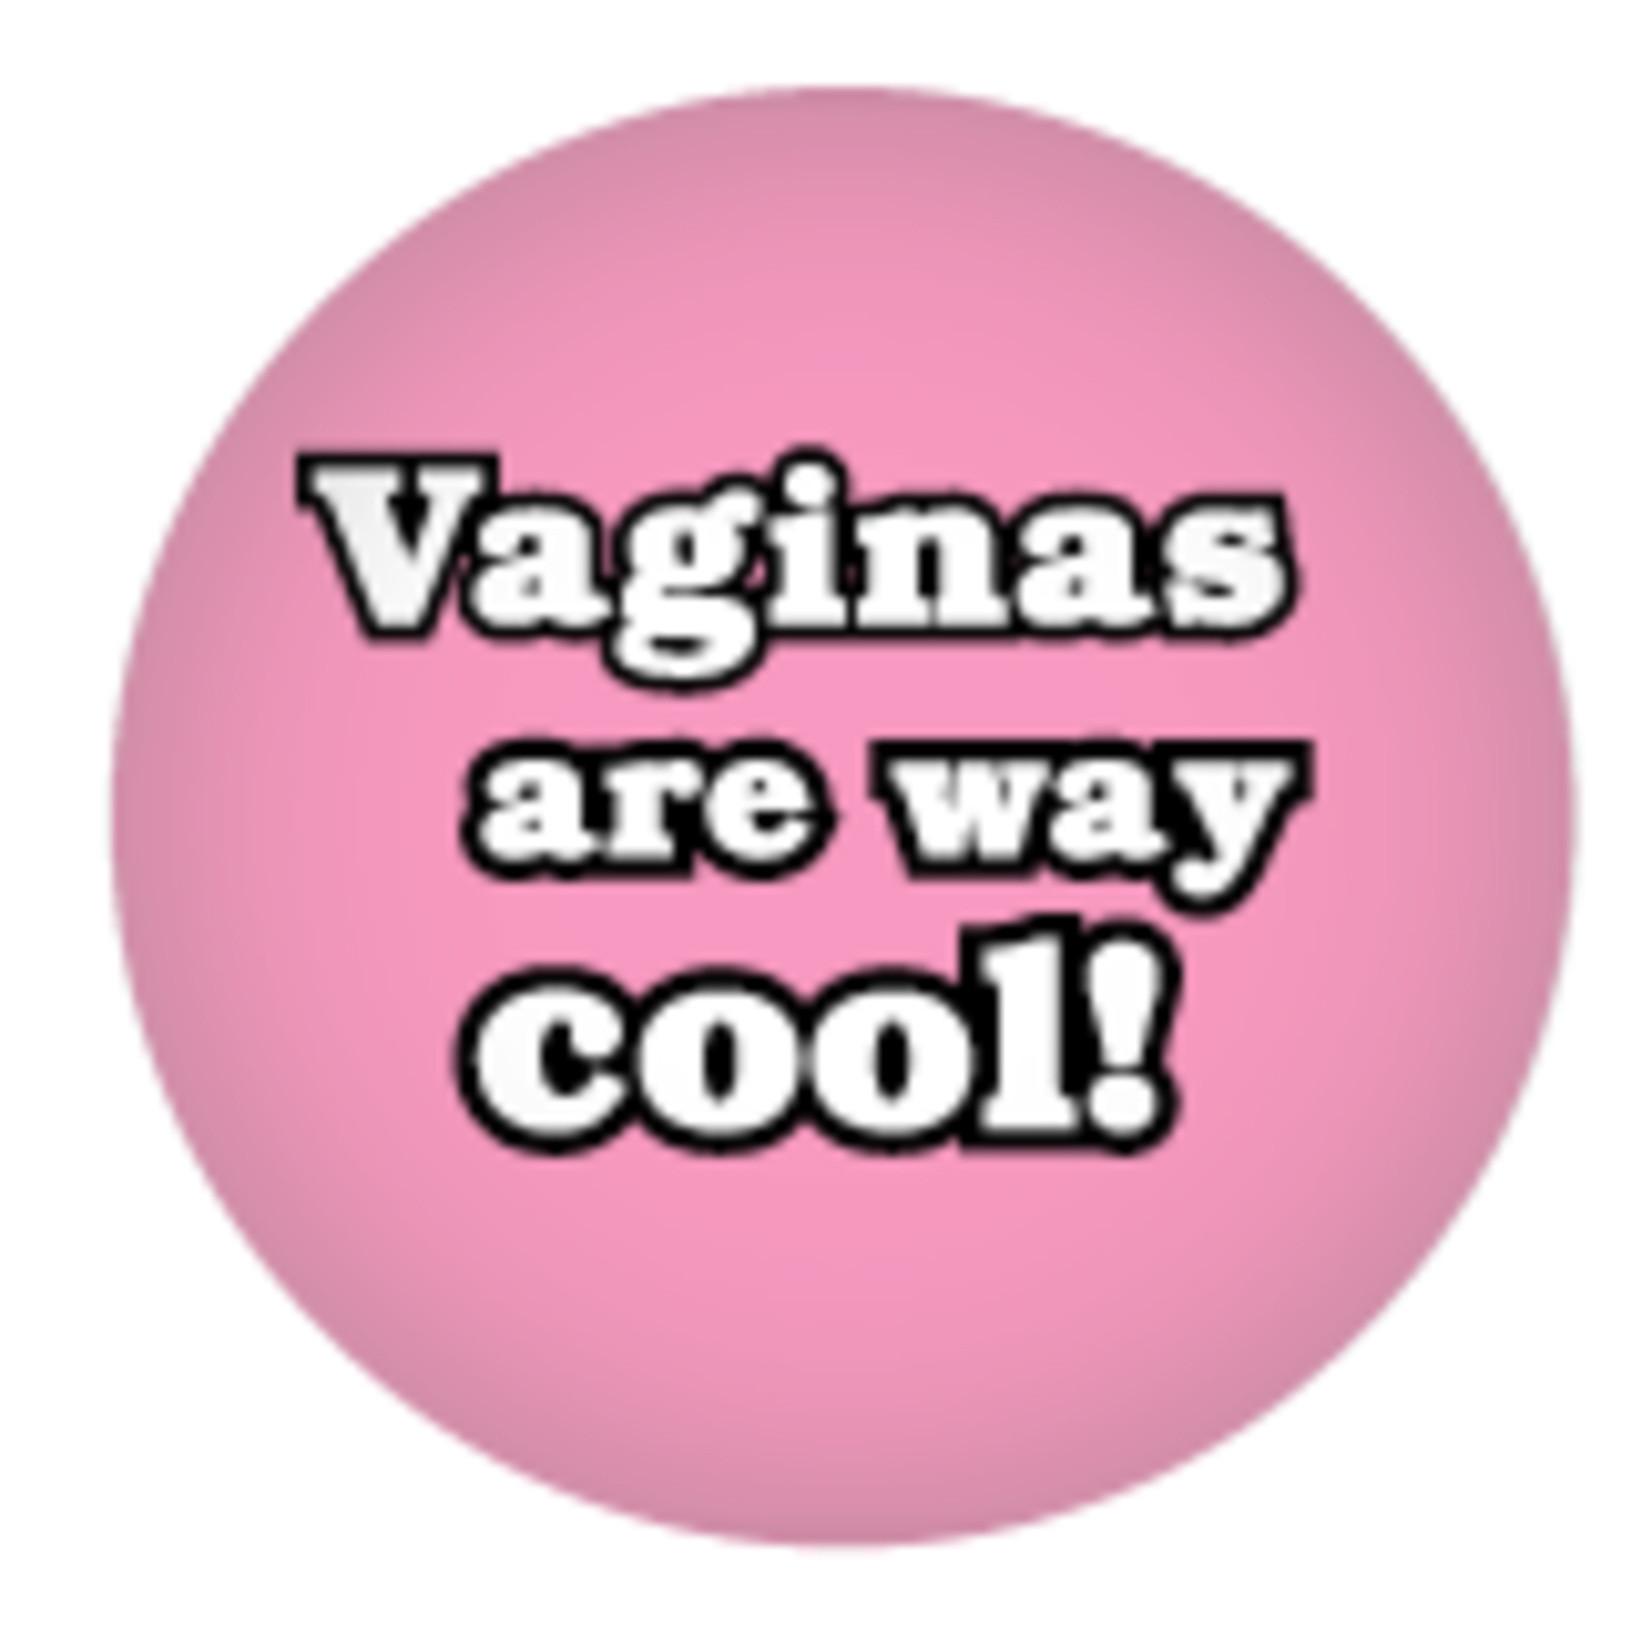 Button - Vaginas Are Way Cool!